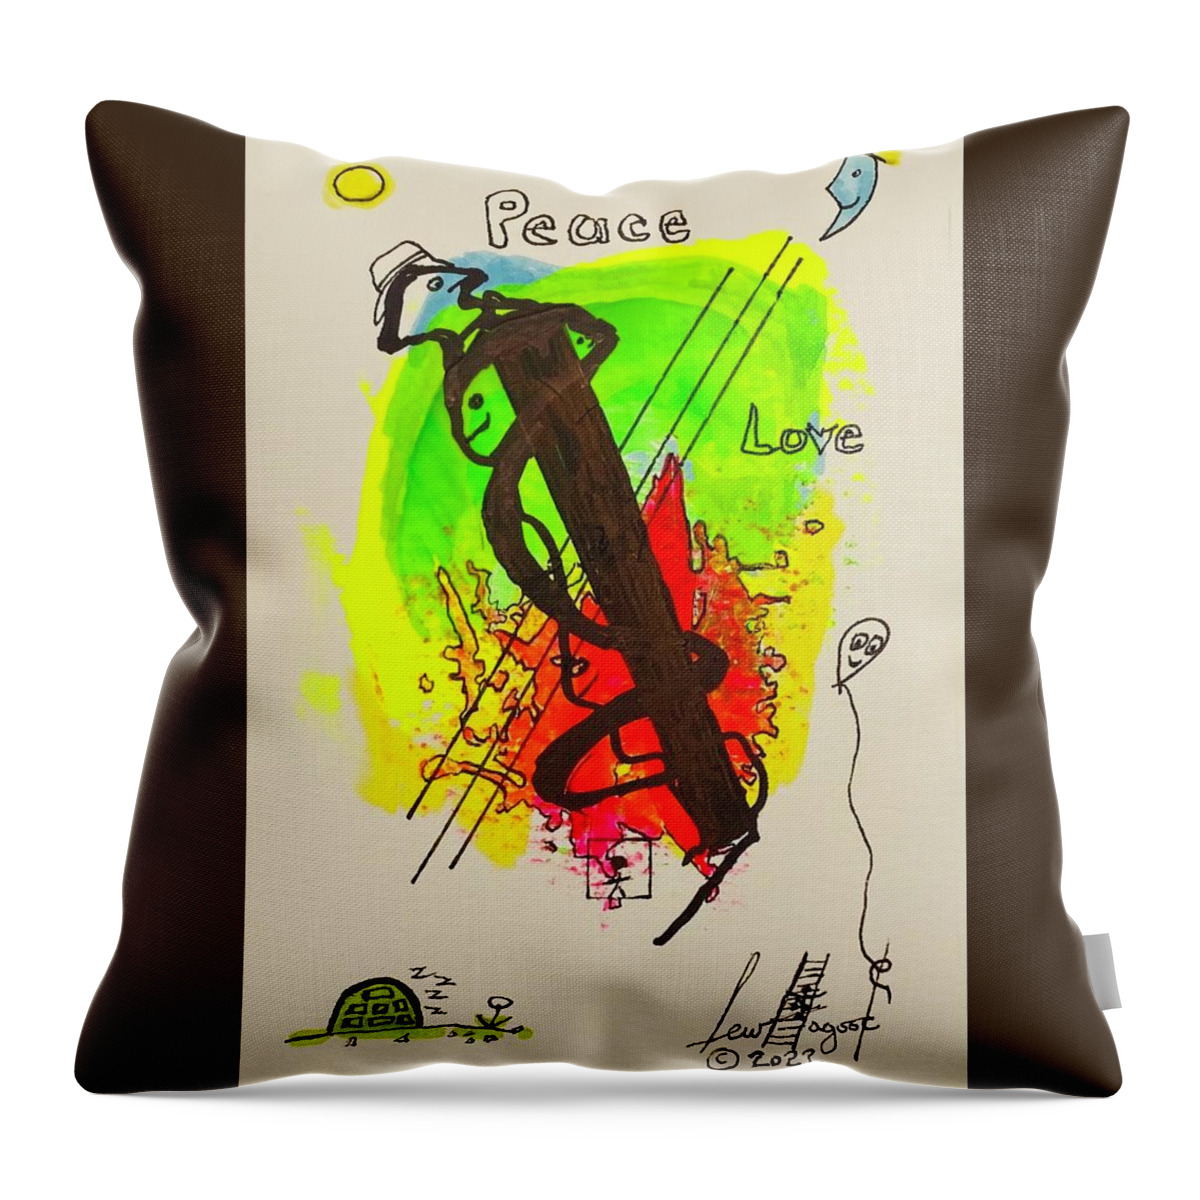  Throw Pillow featuring the mixed media Peace and Love Faces 81034 by Lew Hagood